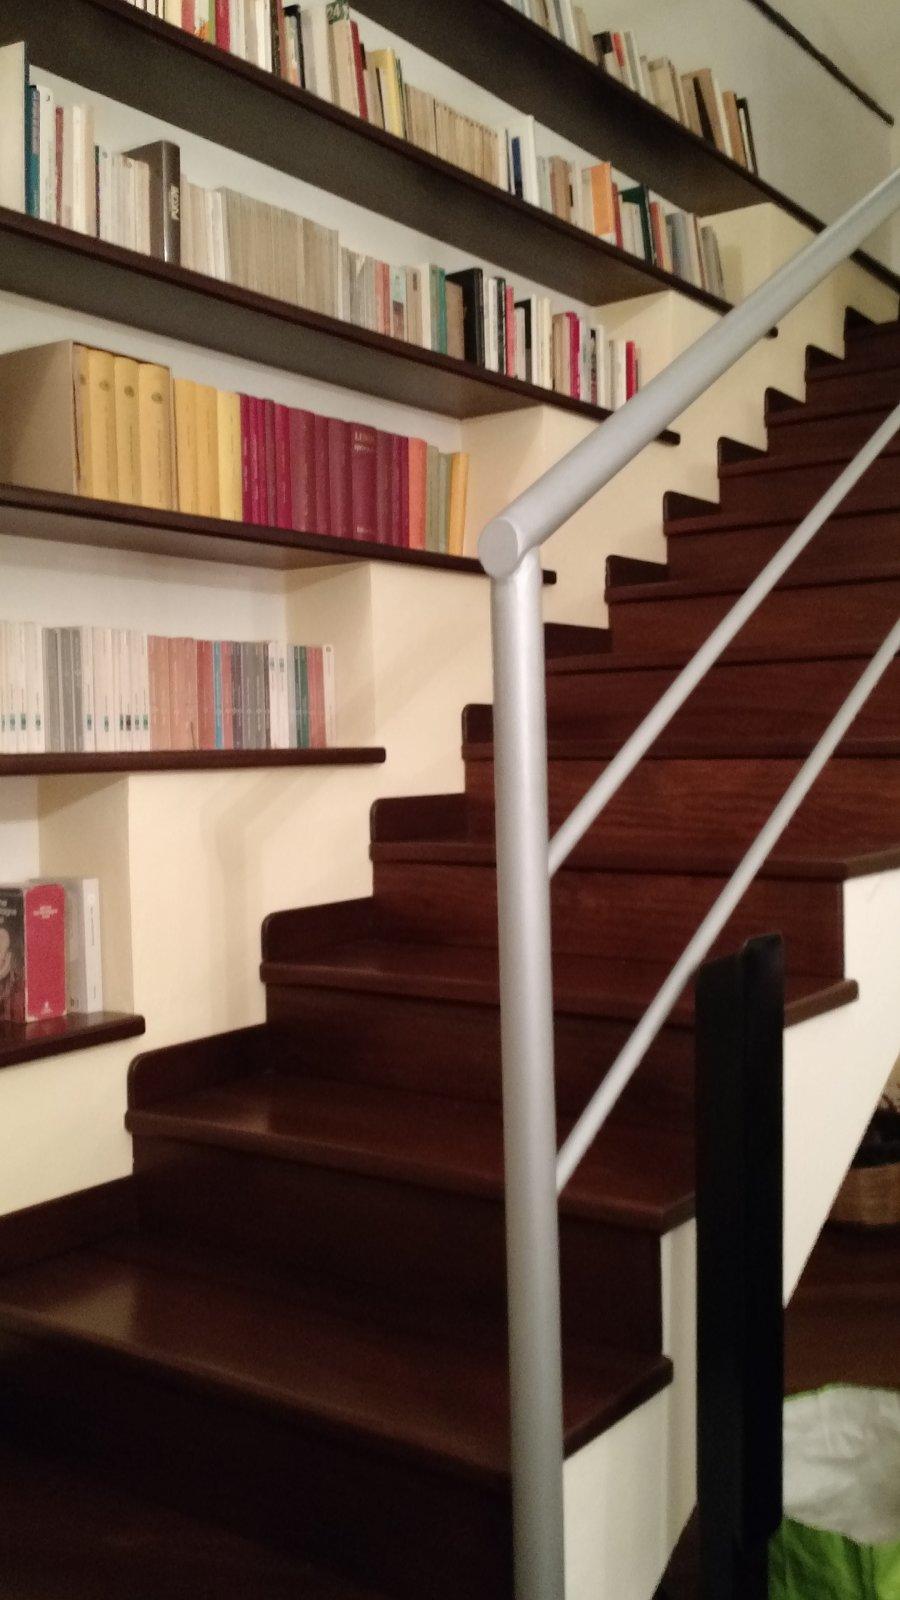 Book case and stairs to the left of the entrance to the living room.